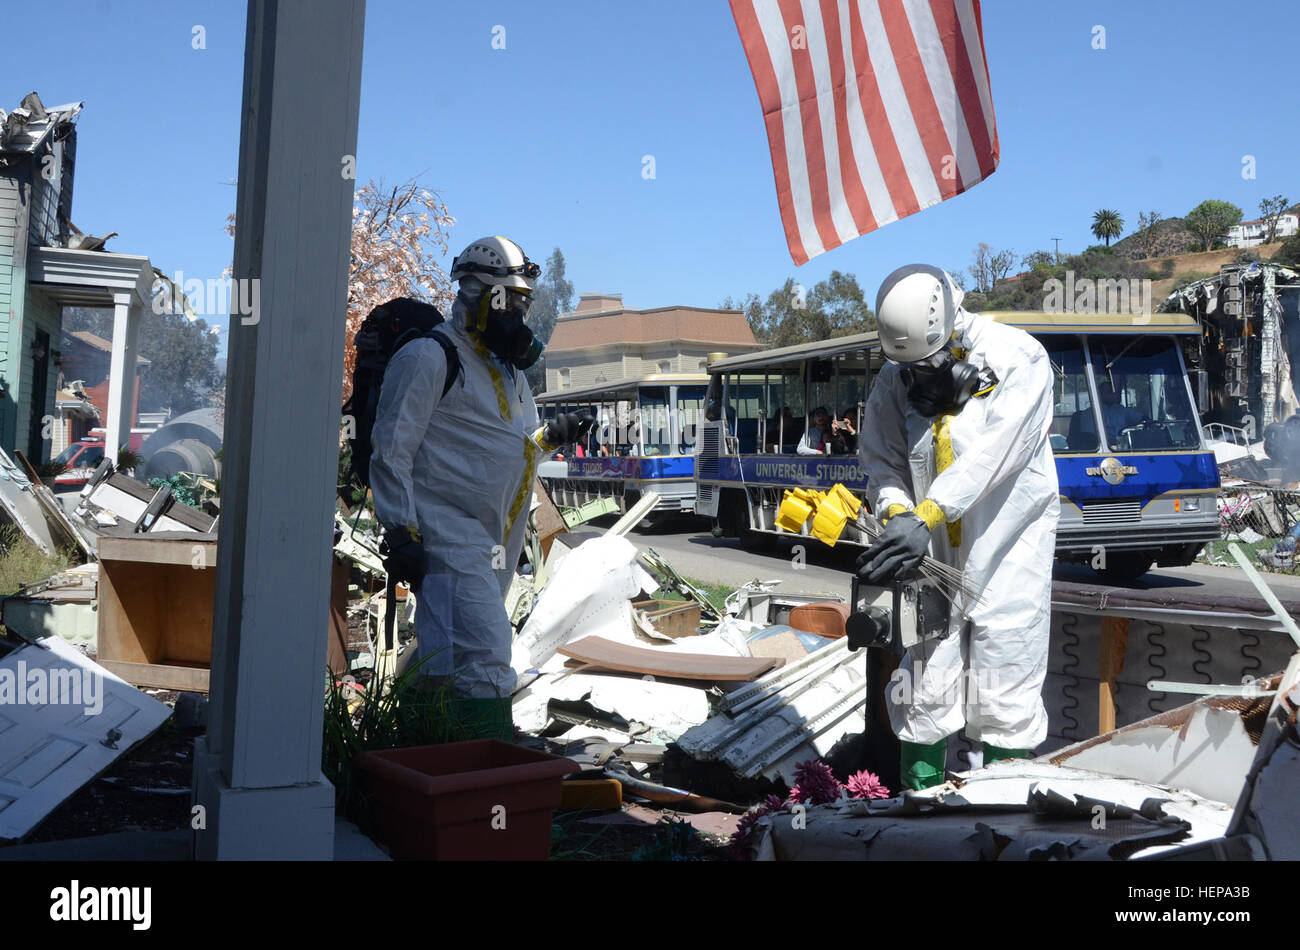 Members of the California National Guard's Los Alamitos-based 9th Civil Support Team survey the wreckage of a simulated plane crash at Universal Studios Hollywood April 8. The survey team found dangerous radiation levels at the site, where a health care company had used radioactive isotopes to make products used in medical tests. 9th CST brings expertise, sense of purpose to disaster response, Universal Studios lends realistic setting to jet crash, radiation leak drill 150408-A-BH123-002 Stock Photo